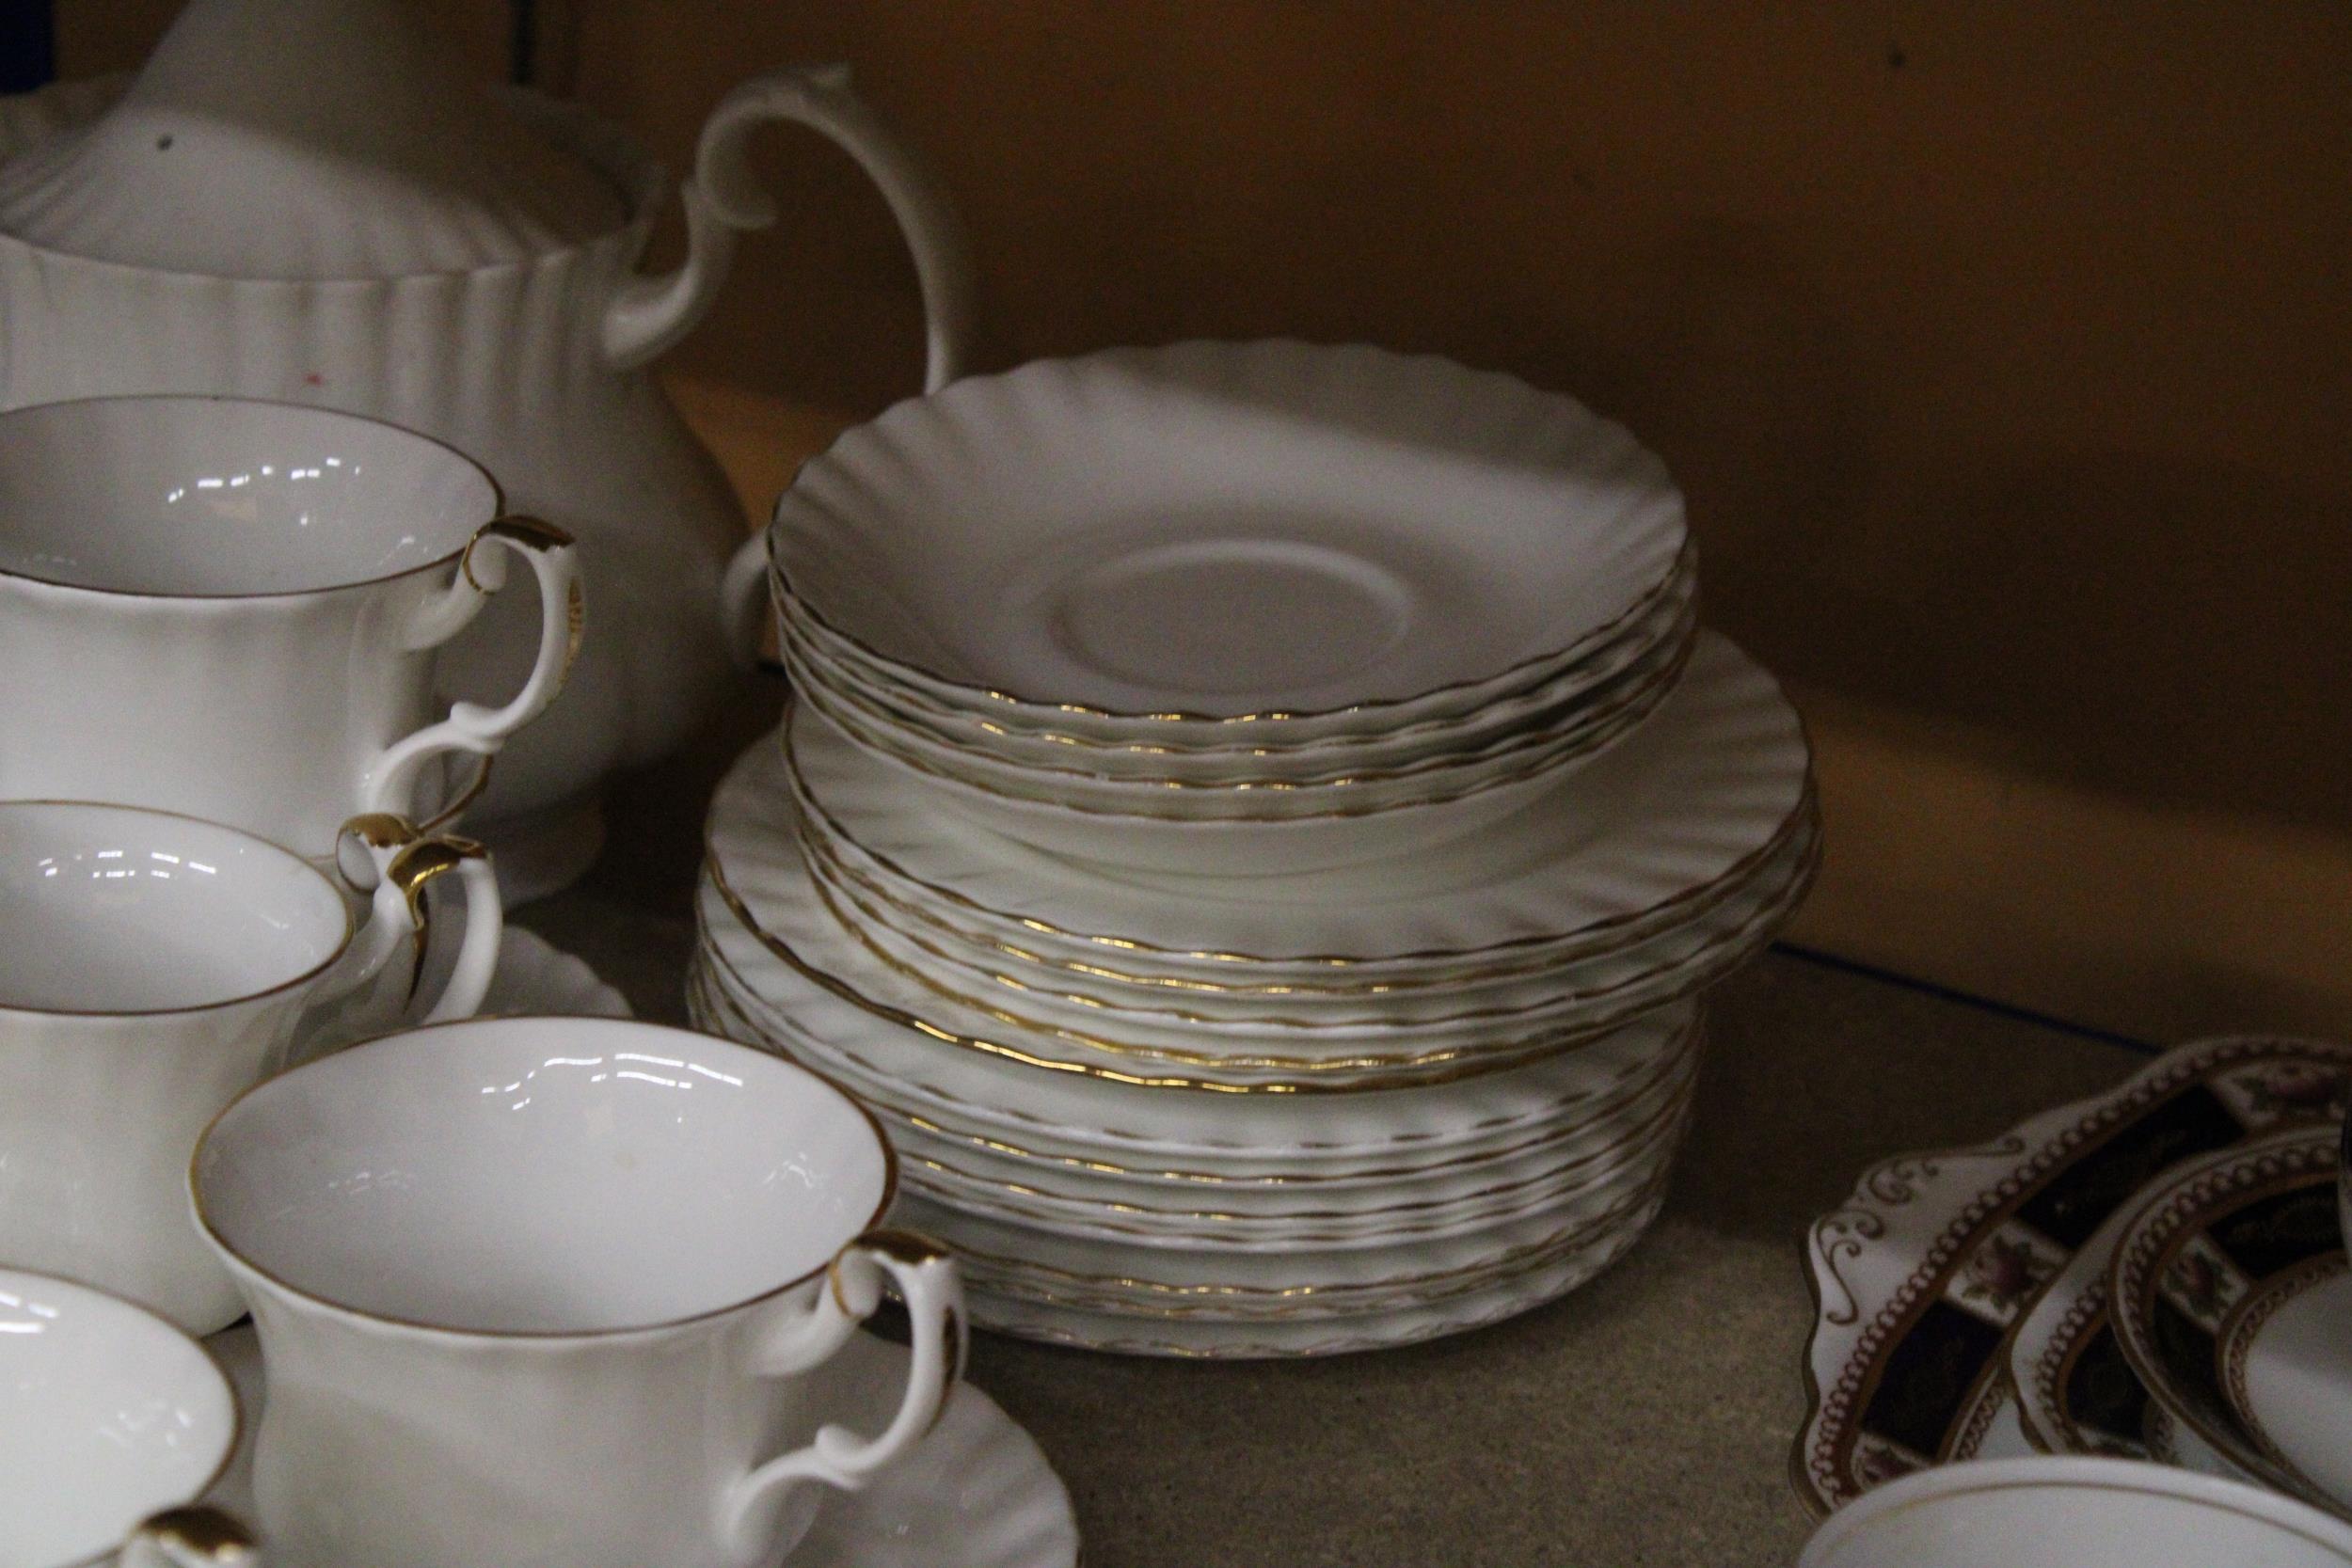 A ROYAL ALBERT "VAL DOR" EMPIRE WHITE, GOLD DECOR TEA SET TO INCLUDE CUPS, SAUCERS, SIDEPLATES, - Image 2 of 6